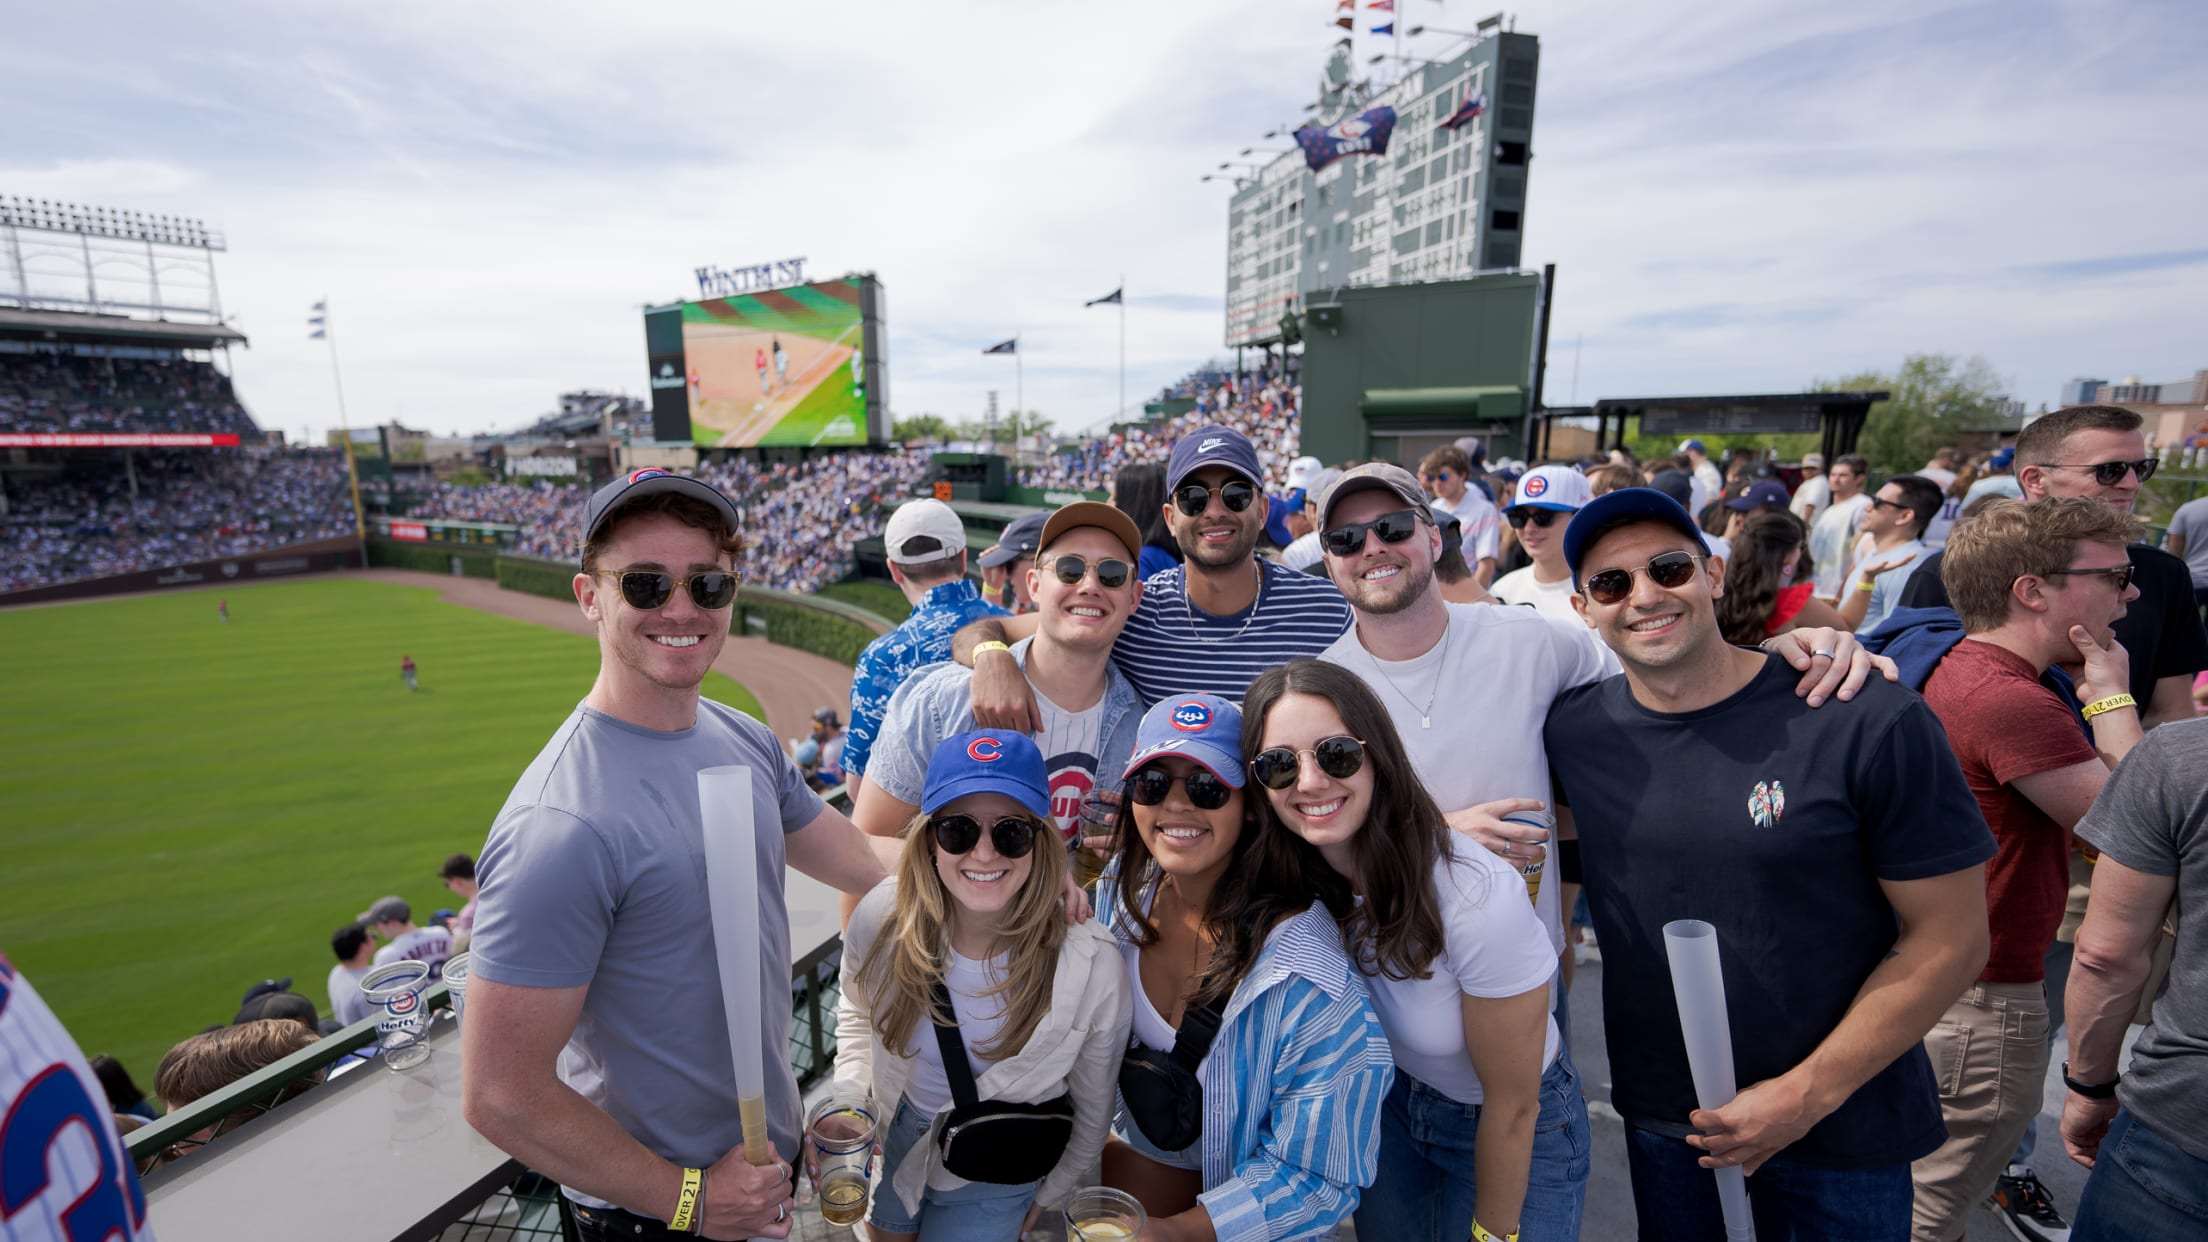 Team outing at Wrigley Field